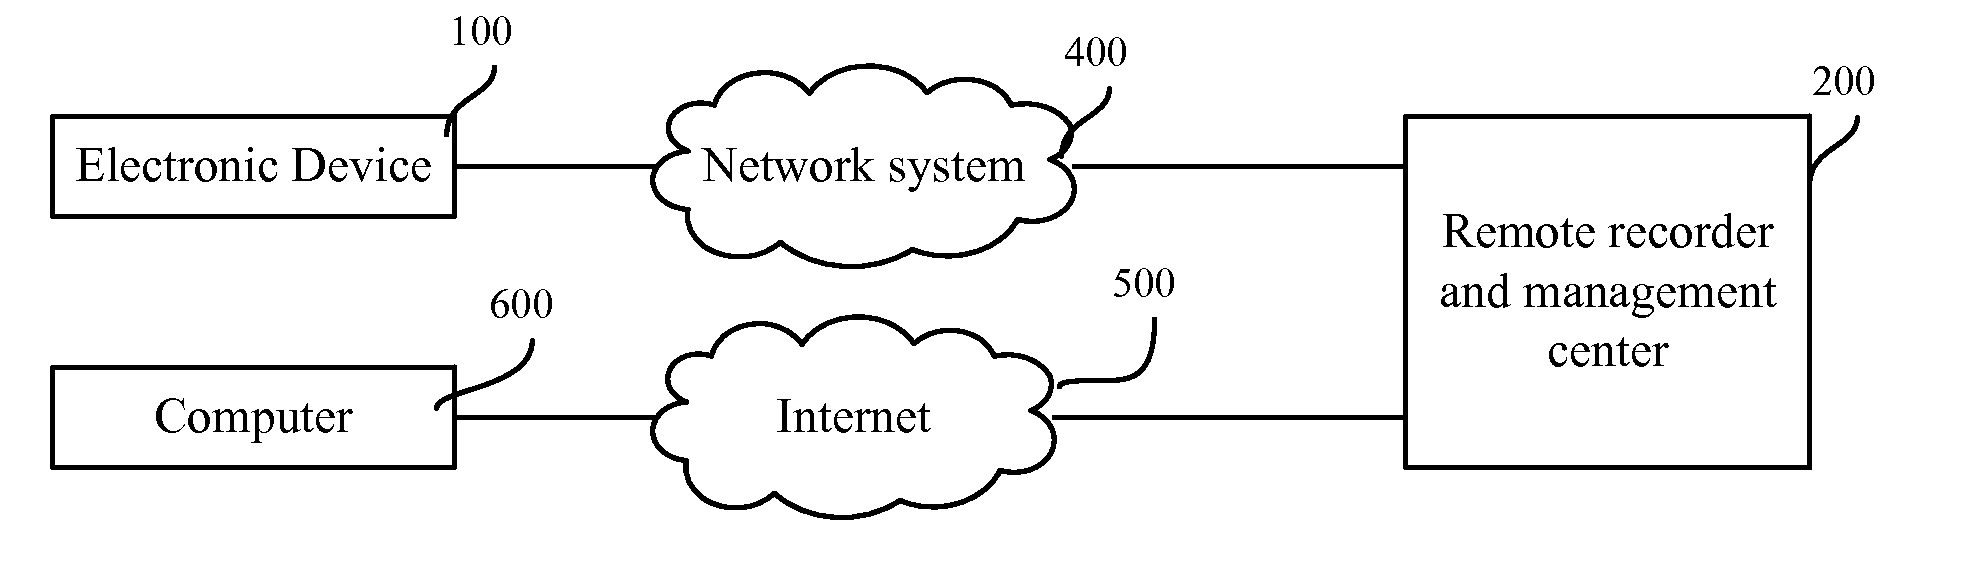 Methods and Systems for Remotely Recording and Managing Associated Recorded Files & Electronic Devices